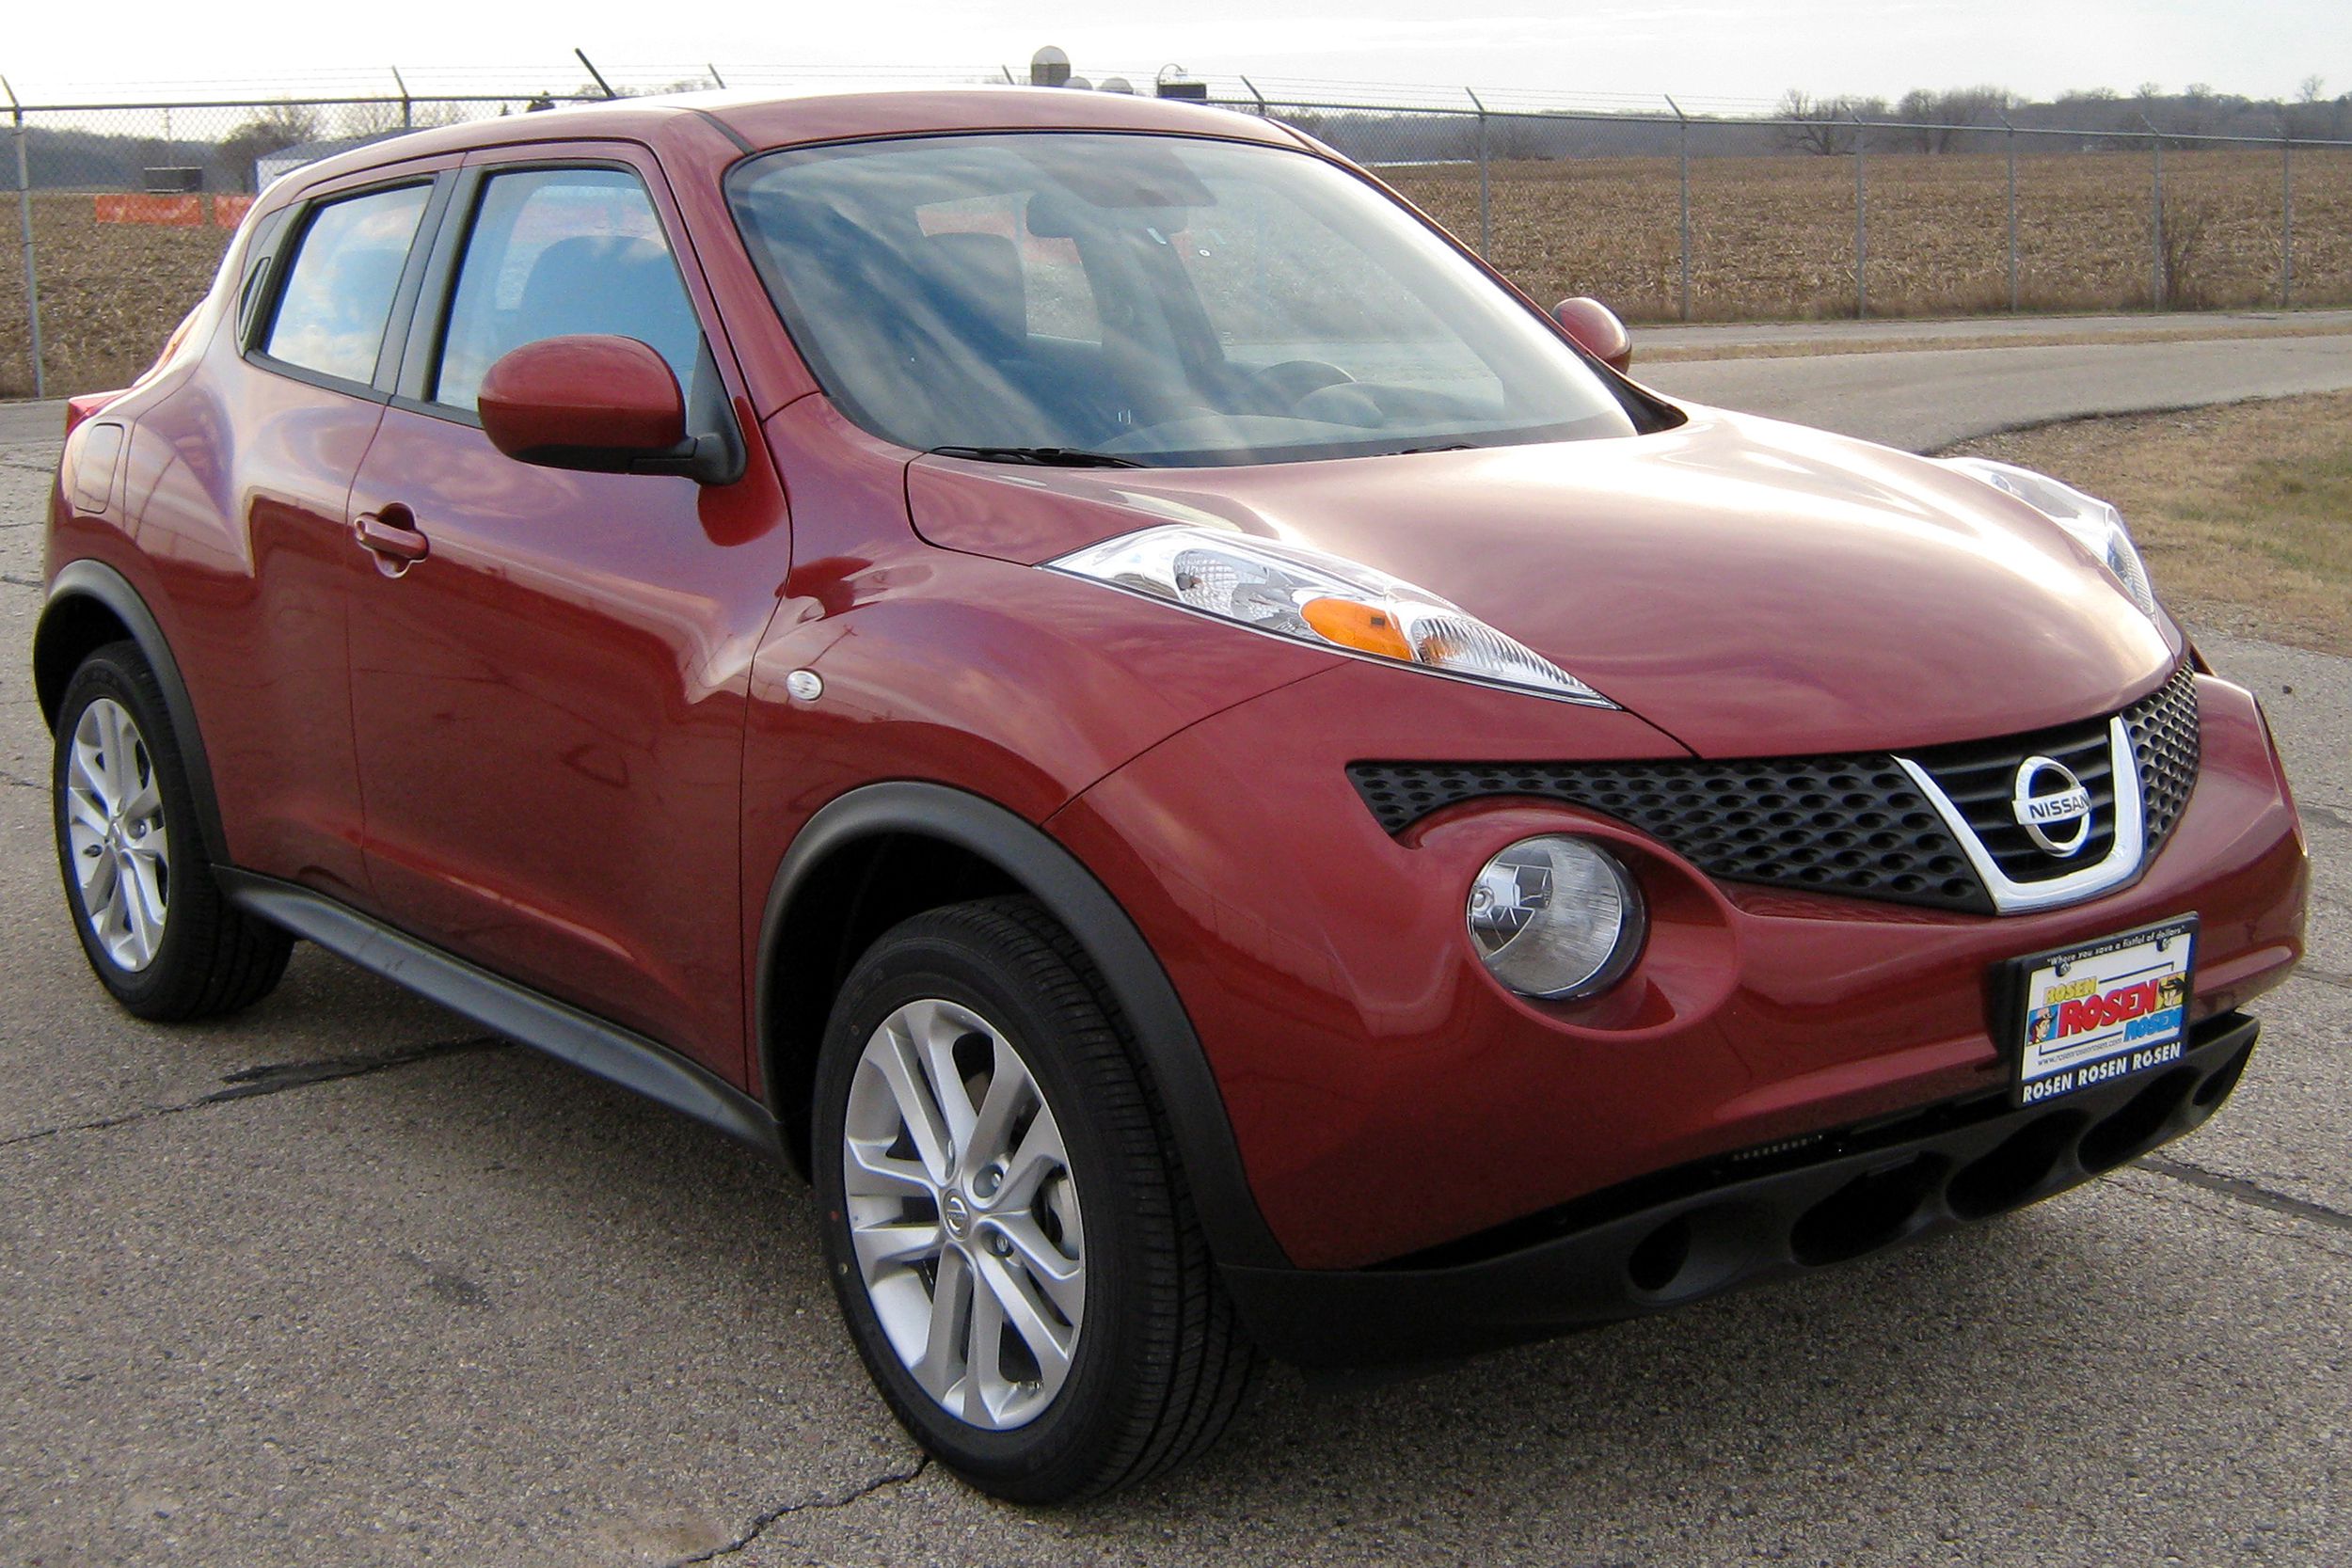 <p>Nissan's second relatively recent entry on this list of the ugliest cars, the Juke never exactly went mainstream thanks to its unconventional design. Nissan called it "<a href="http://time.com/14391/nissans-ugly-little-suv-now-uglier-than-ever/">a fun car that allows for more assertive expression</a>," but others were unconvinced (The Guardian called it "<a href="https://www.theguardian.com/technology/2011/may/15/car-review-nissan-juke-martin-love">short-muzzled, frog-eyed and magnificently ugly</a>." Regardless, beauty is in the eye of the beholder. Jukes sold well, and Nissan redesigned it to make it even weirder-looking in 2014.</p>